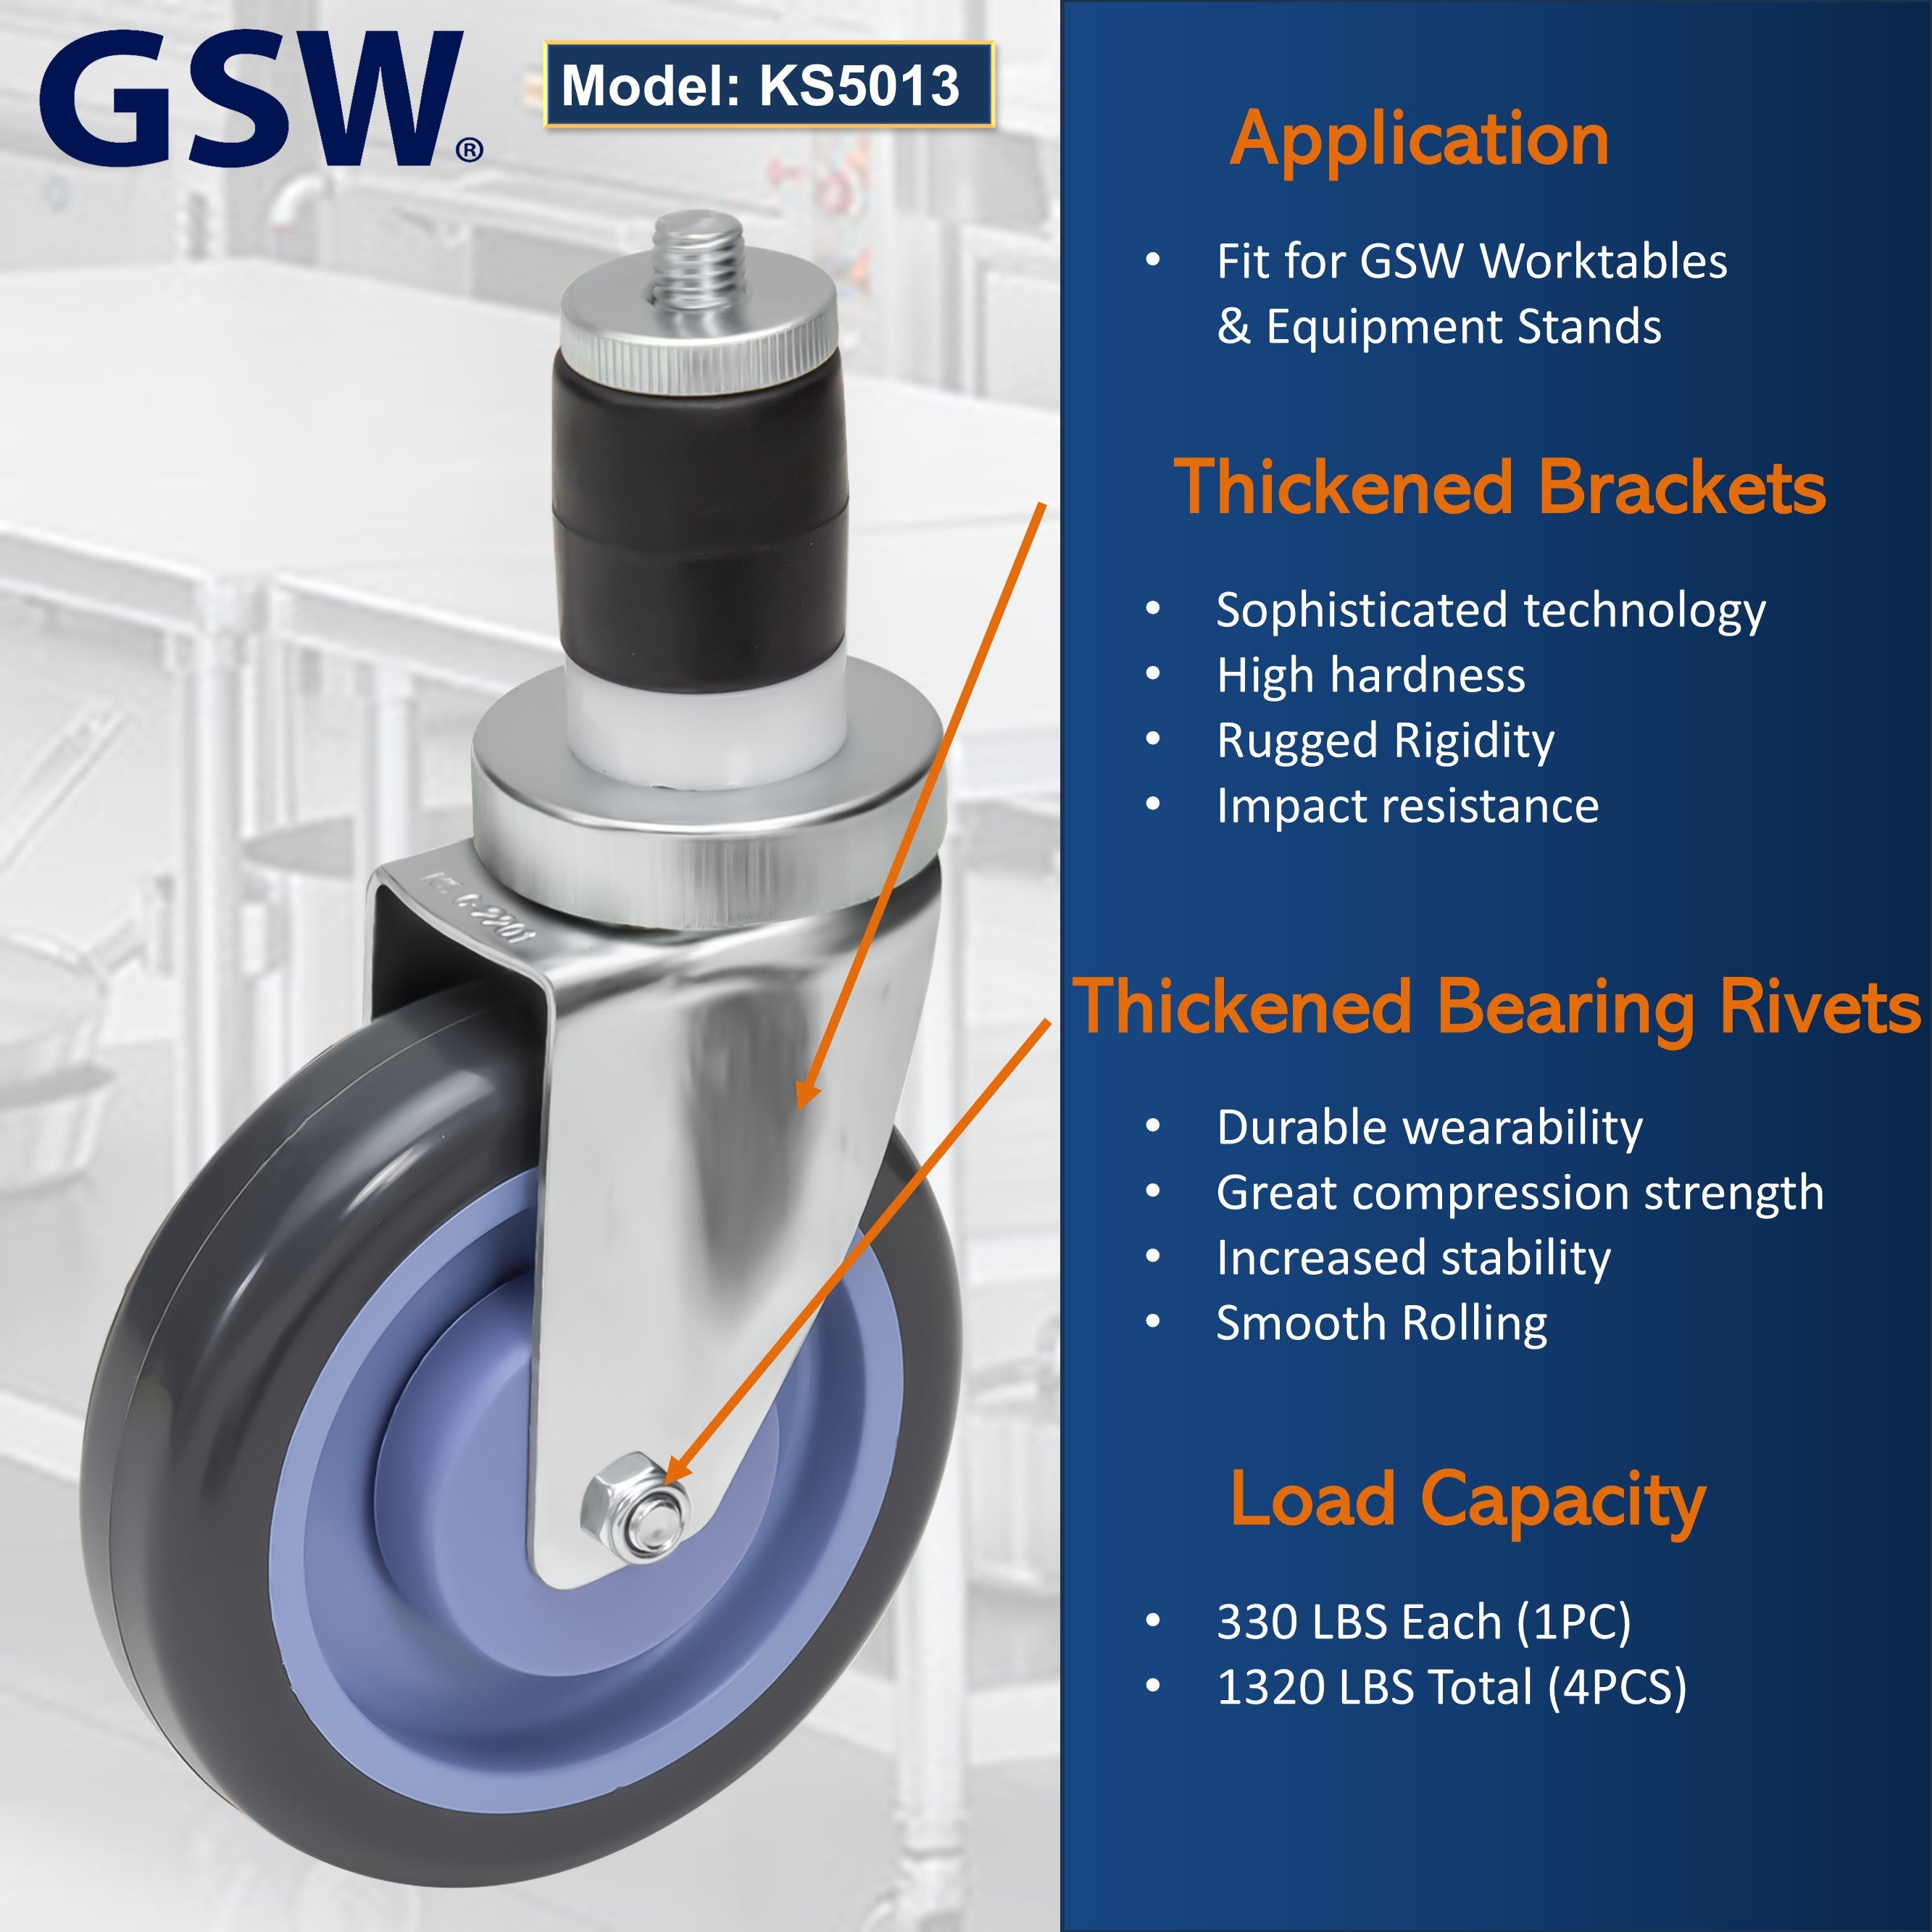 GSW 4" Heavy Duty Casters Wheels with Expanding Stem - Loading Capacity: 1320 lbs; Use for Worktables and Equipment Stands (Swivel)